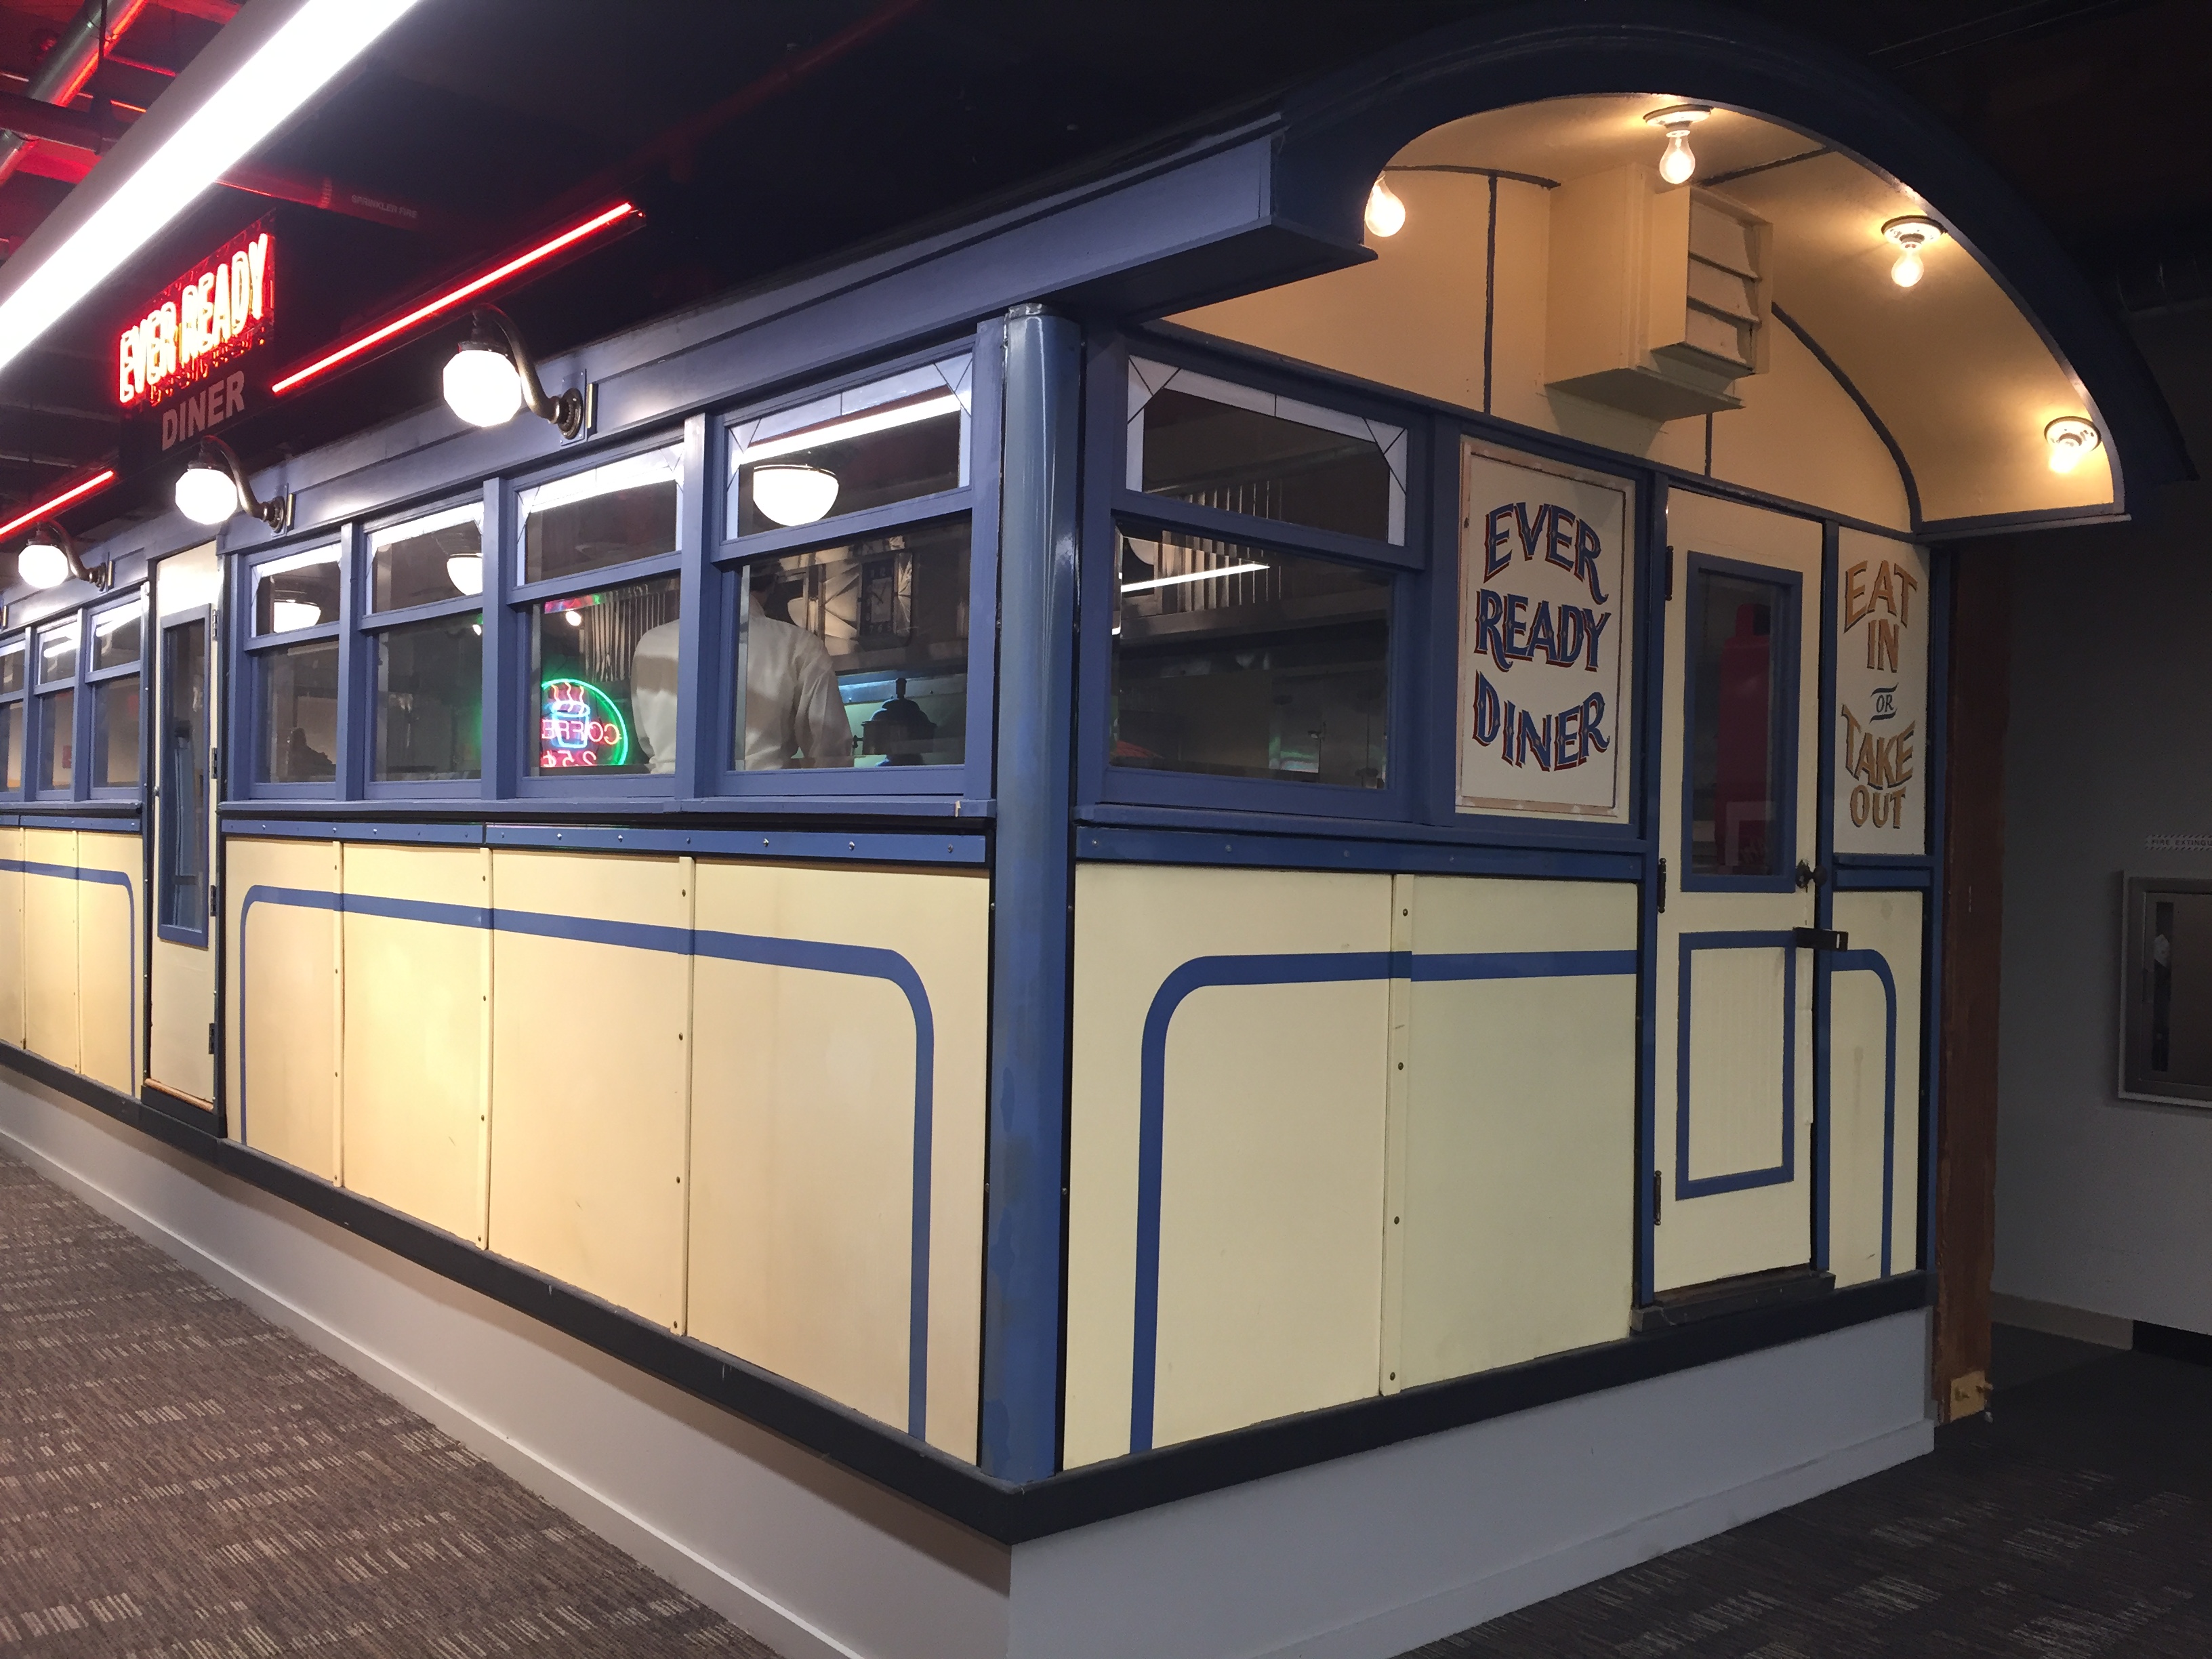 The antique Ever Ready Diner is on display at the Museum